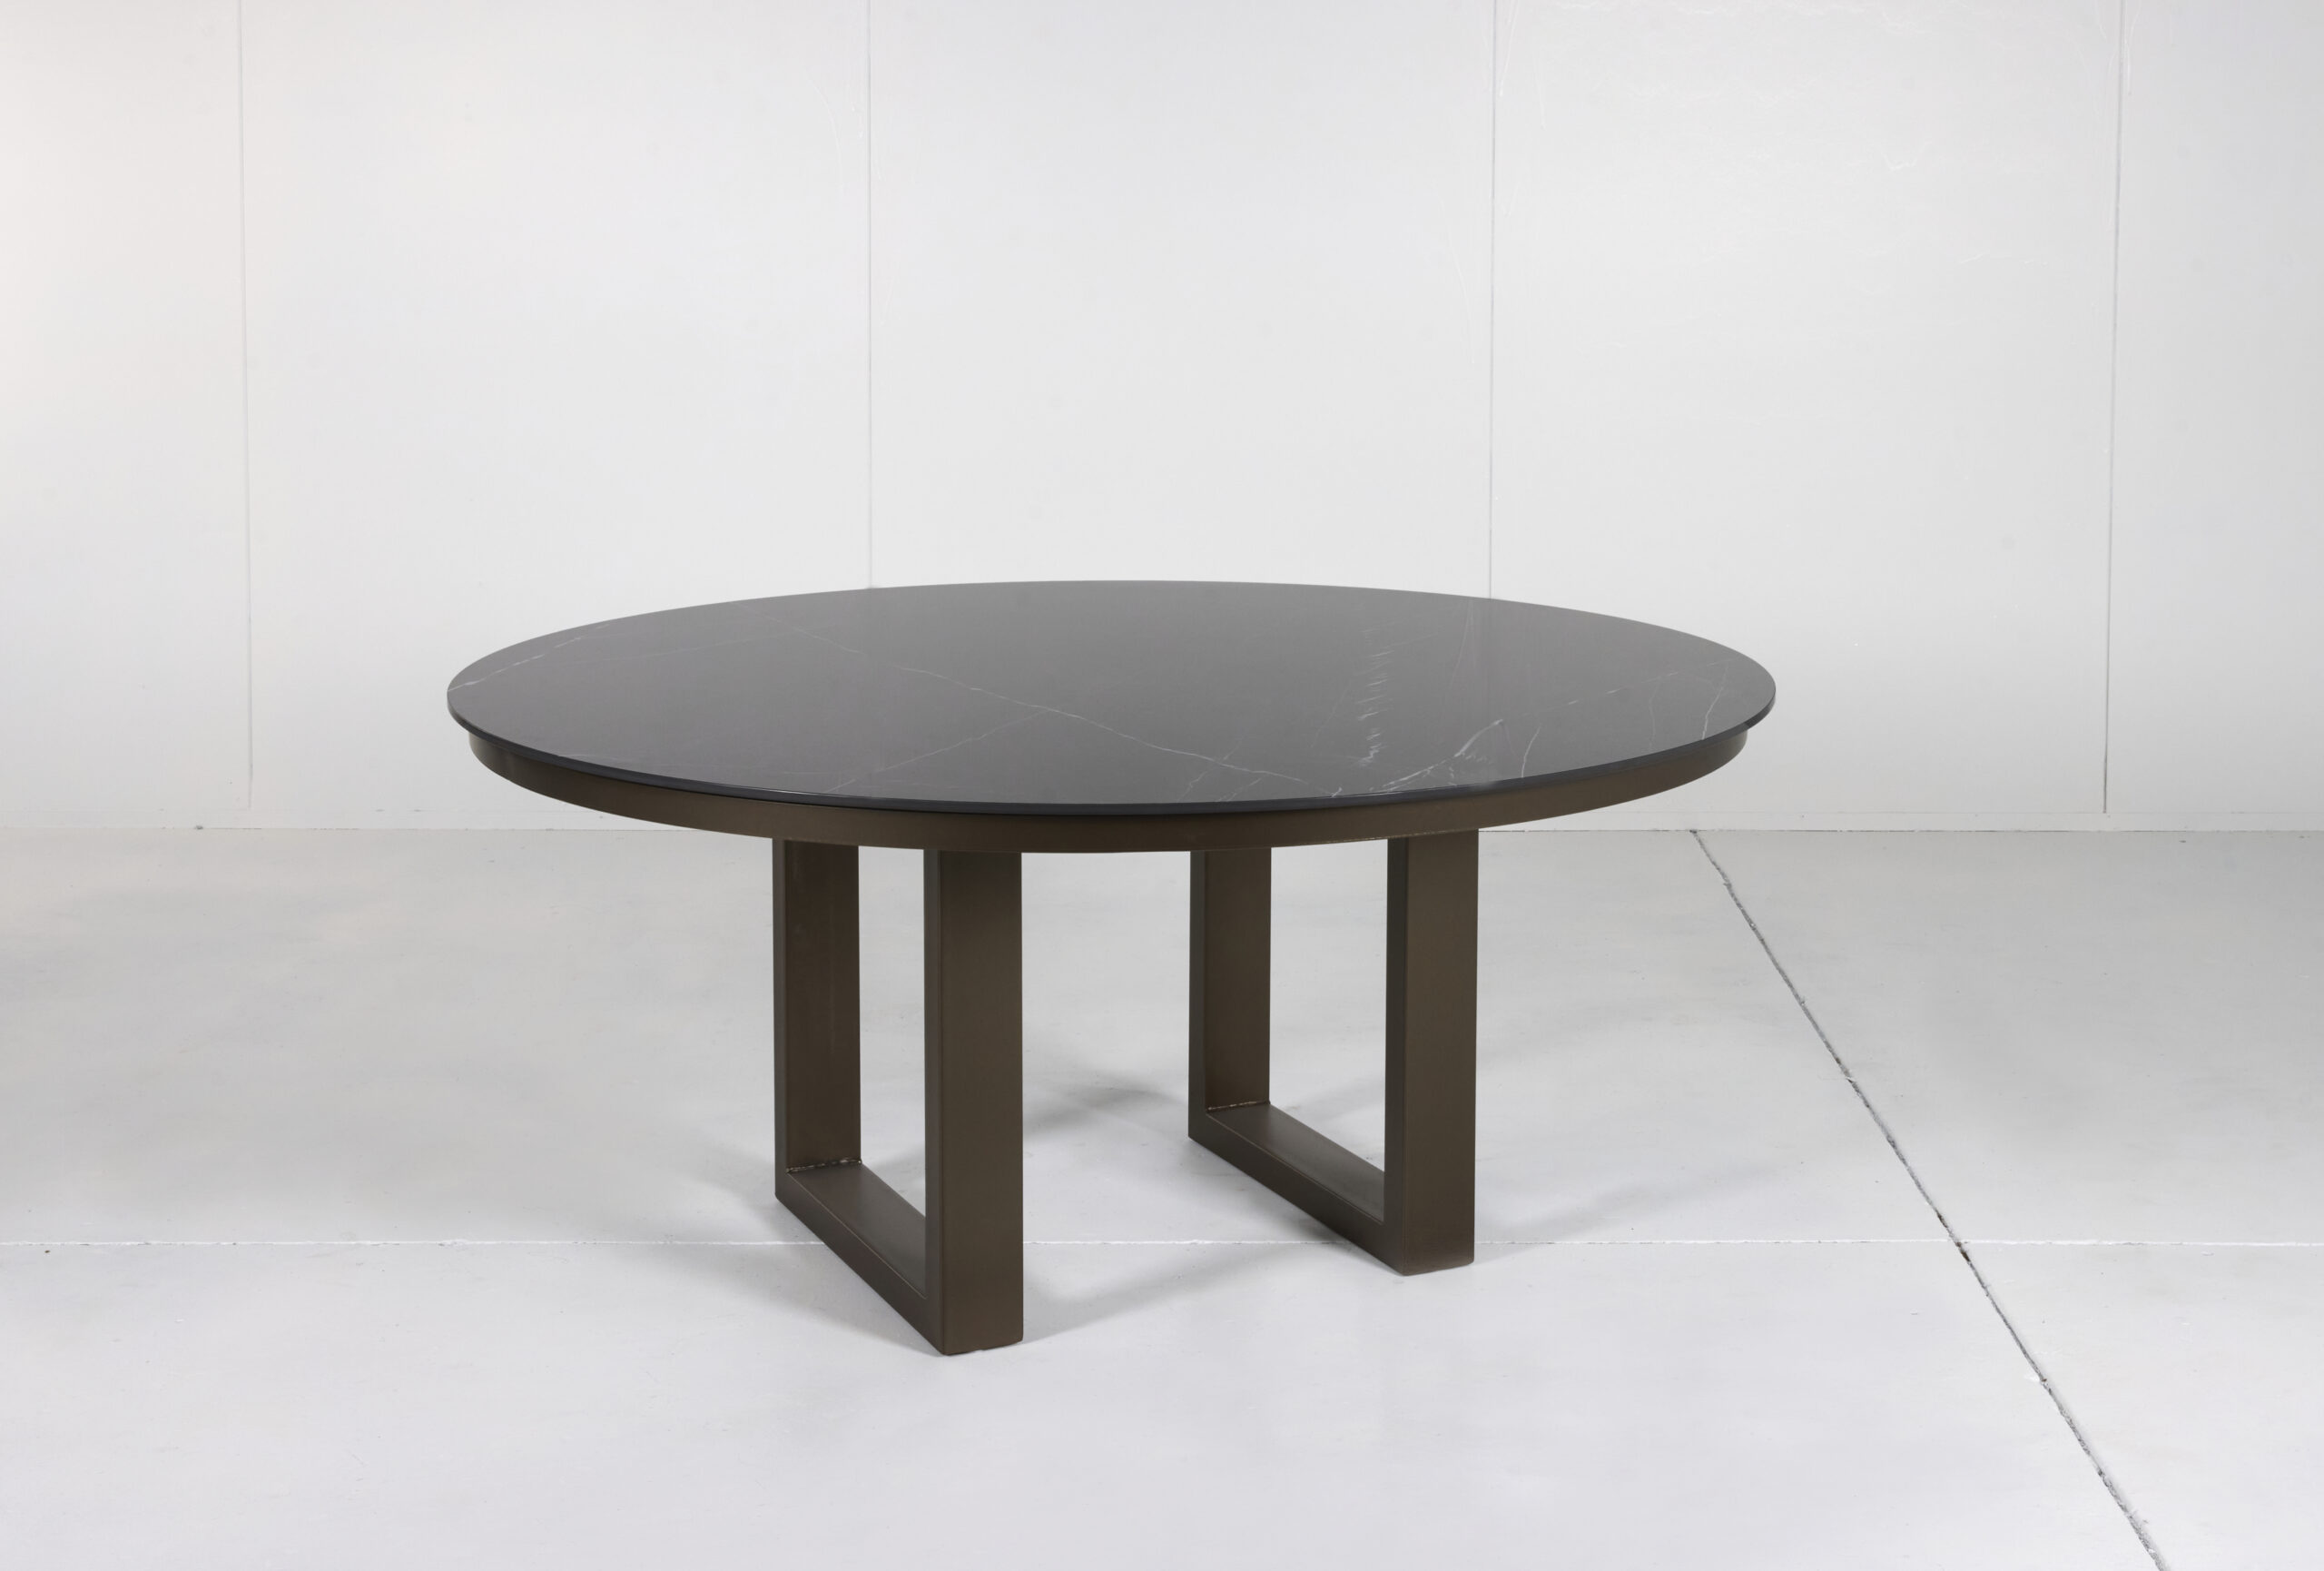 Porcelain Outdoor Round Dining Table with marble top and customizable timber or steel base by Arranmore Furniture.